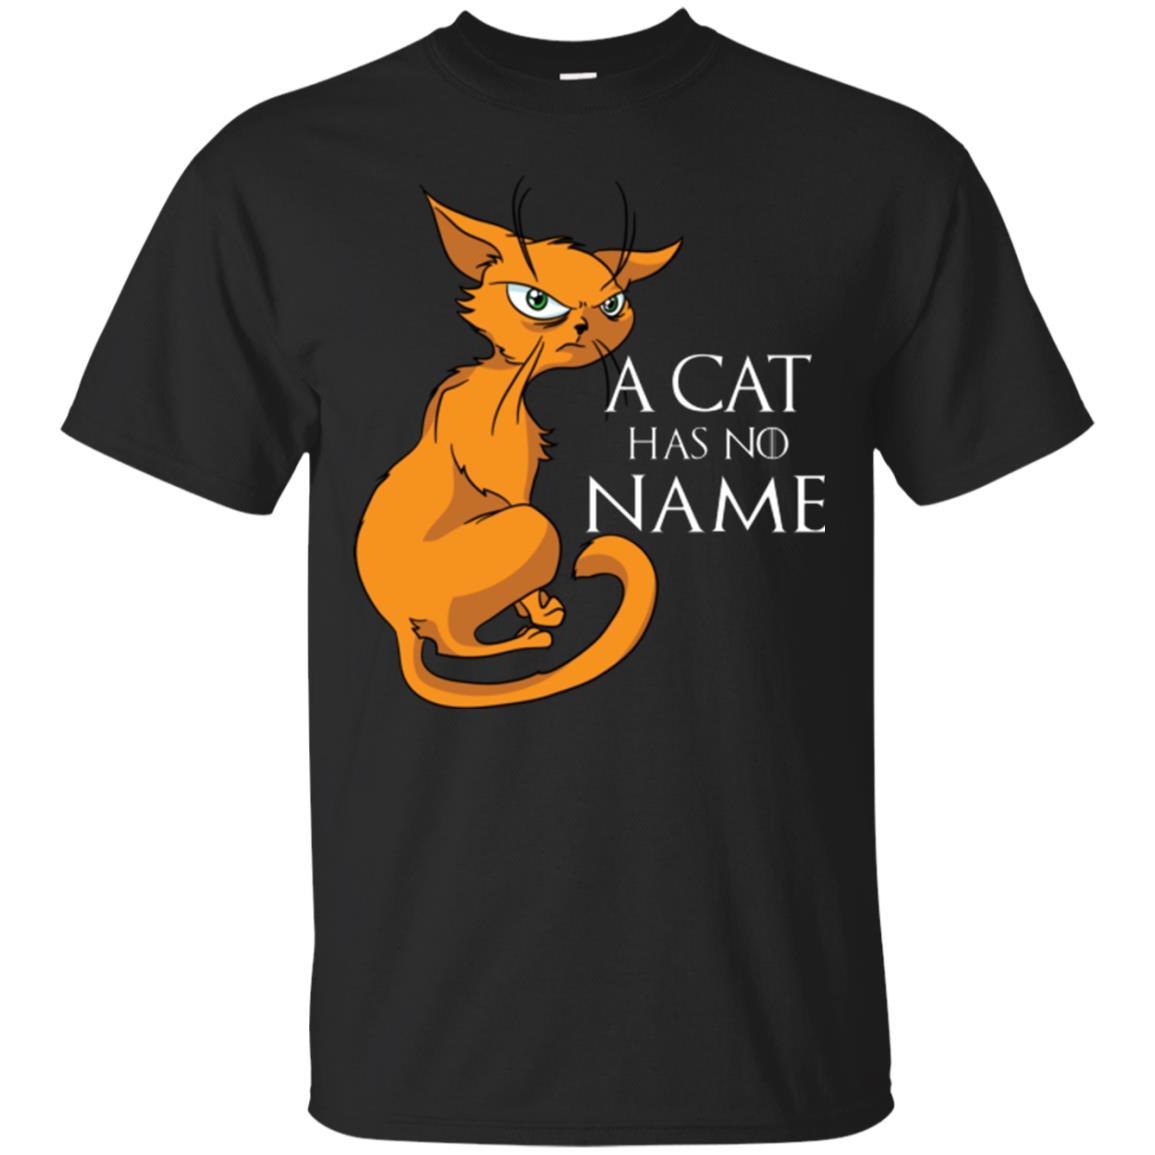 Cat Shirt Funny Game Of Thrones Parody Unisex Tees - GoneBold.gift